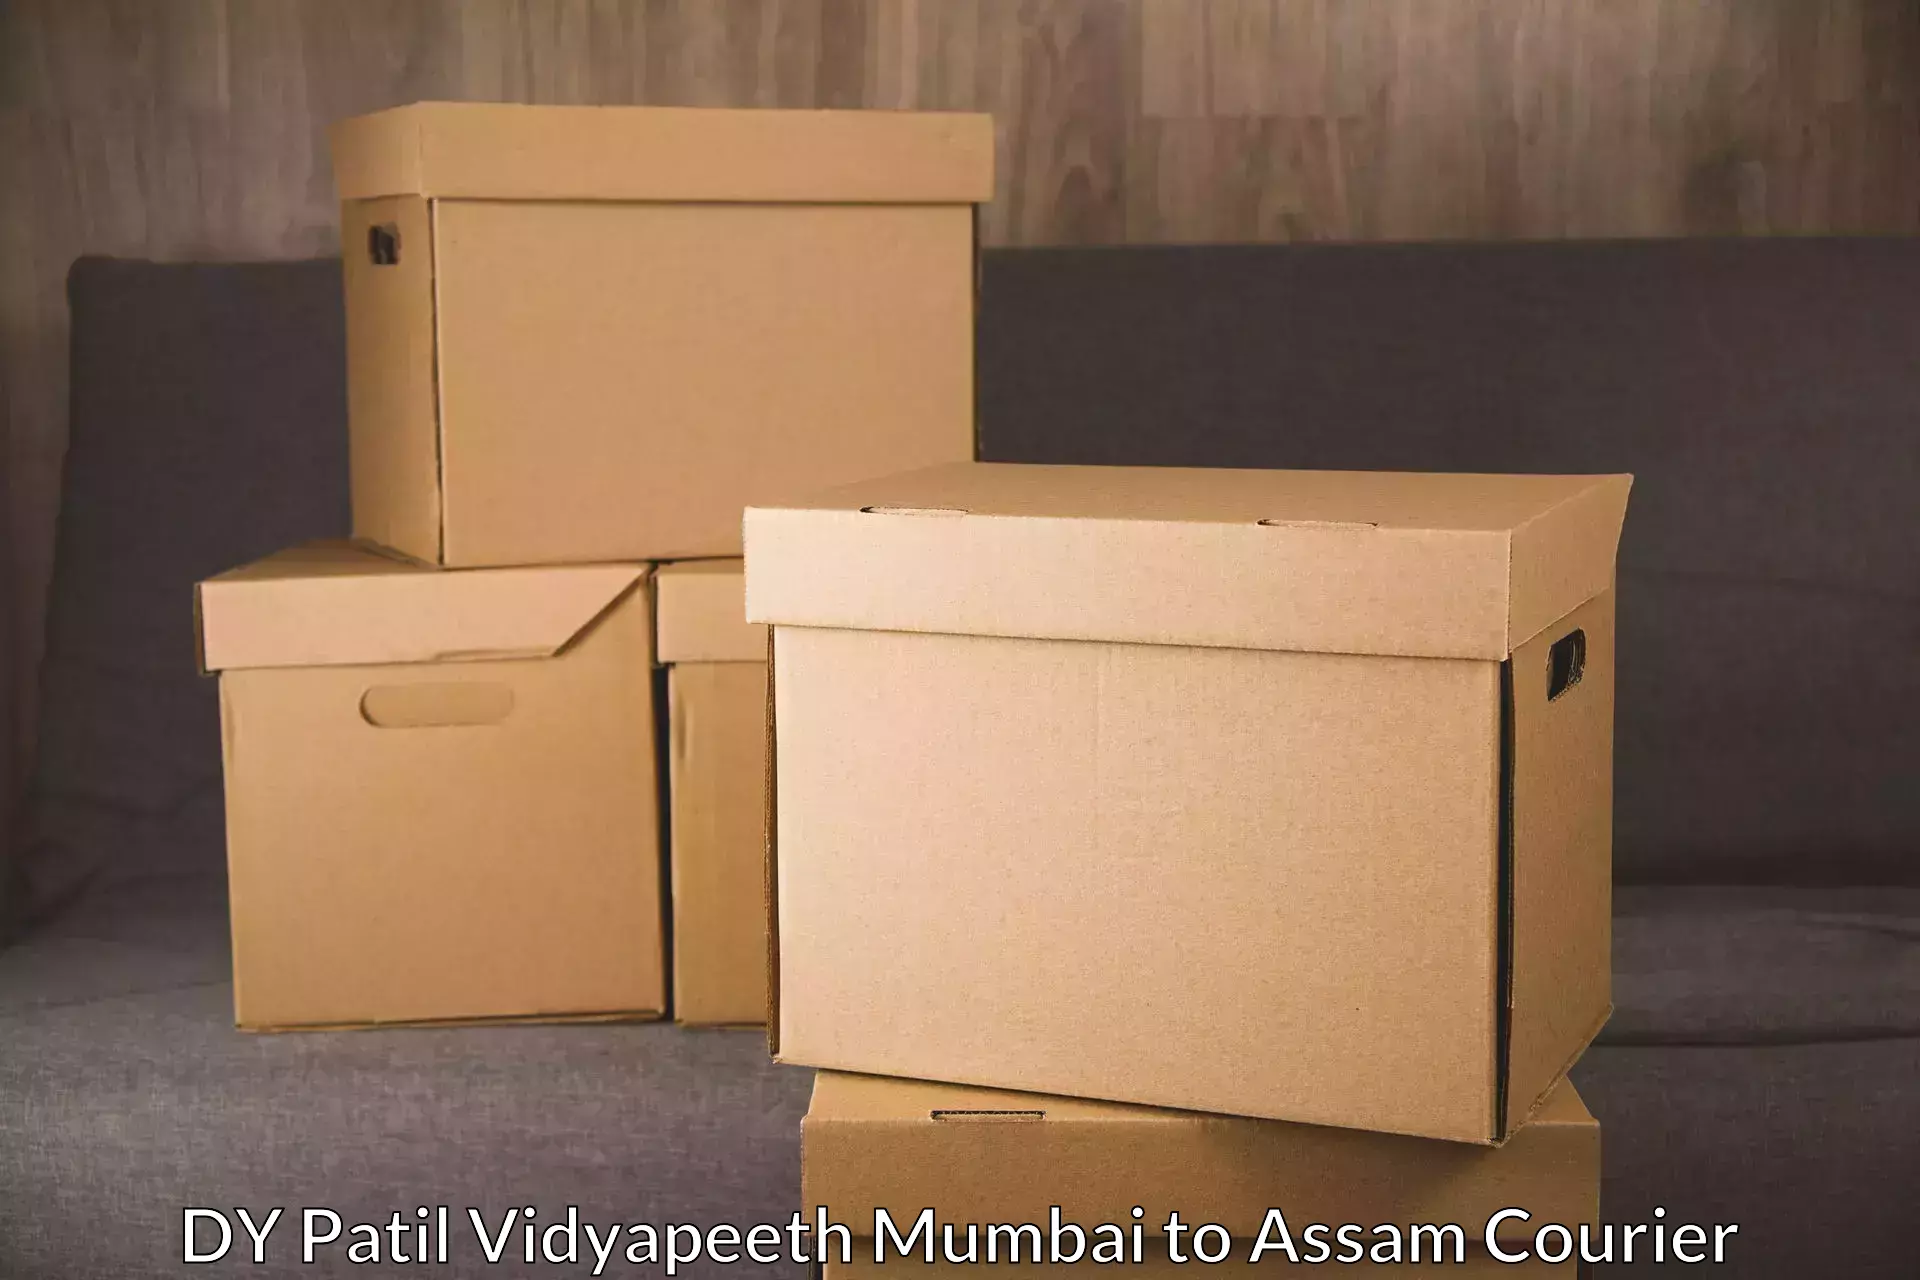 Reliable courier services DY Patil Vidyapeeth Mumbai to Tezpur